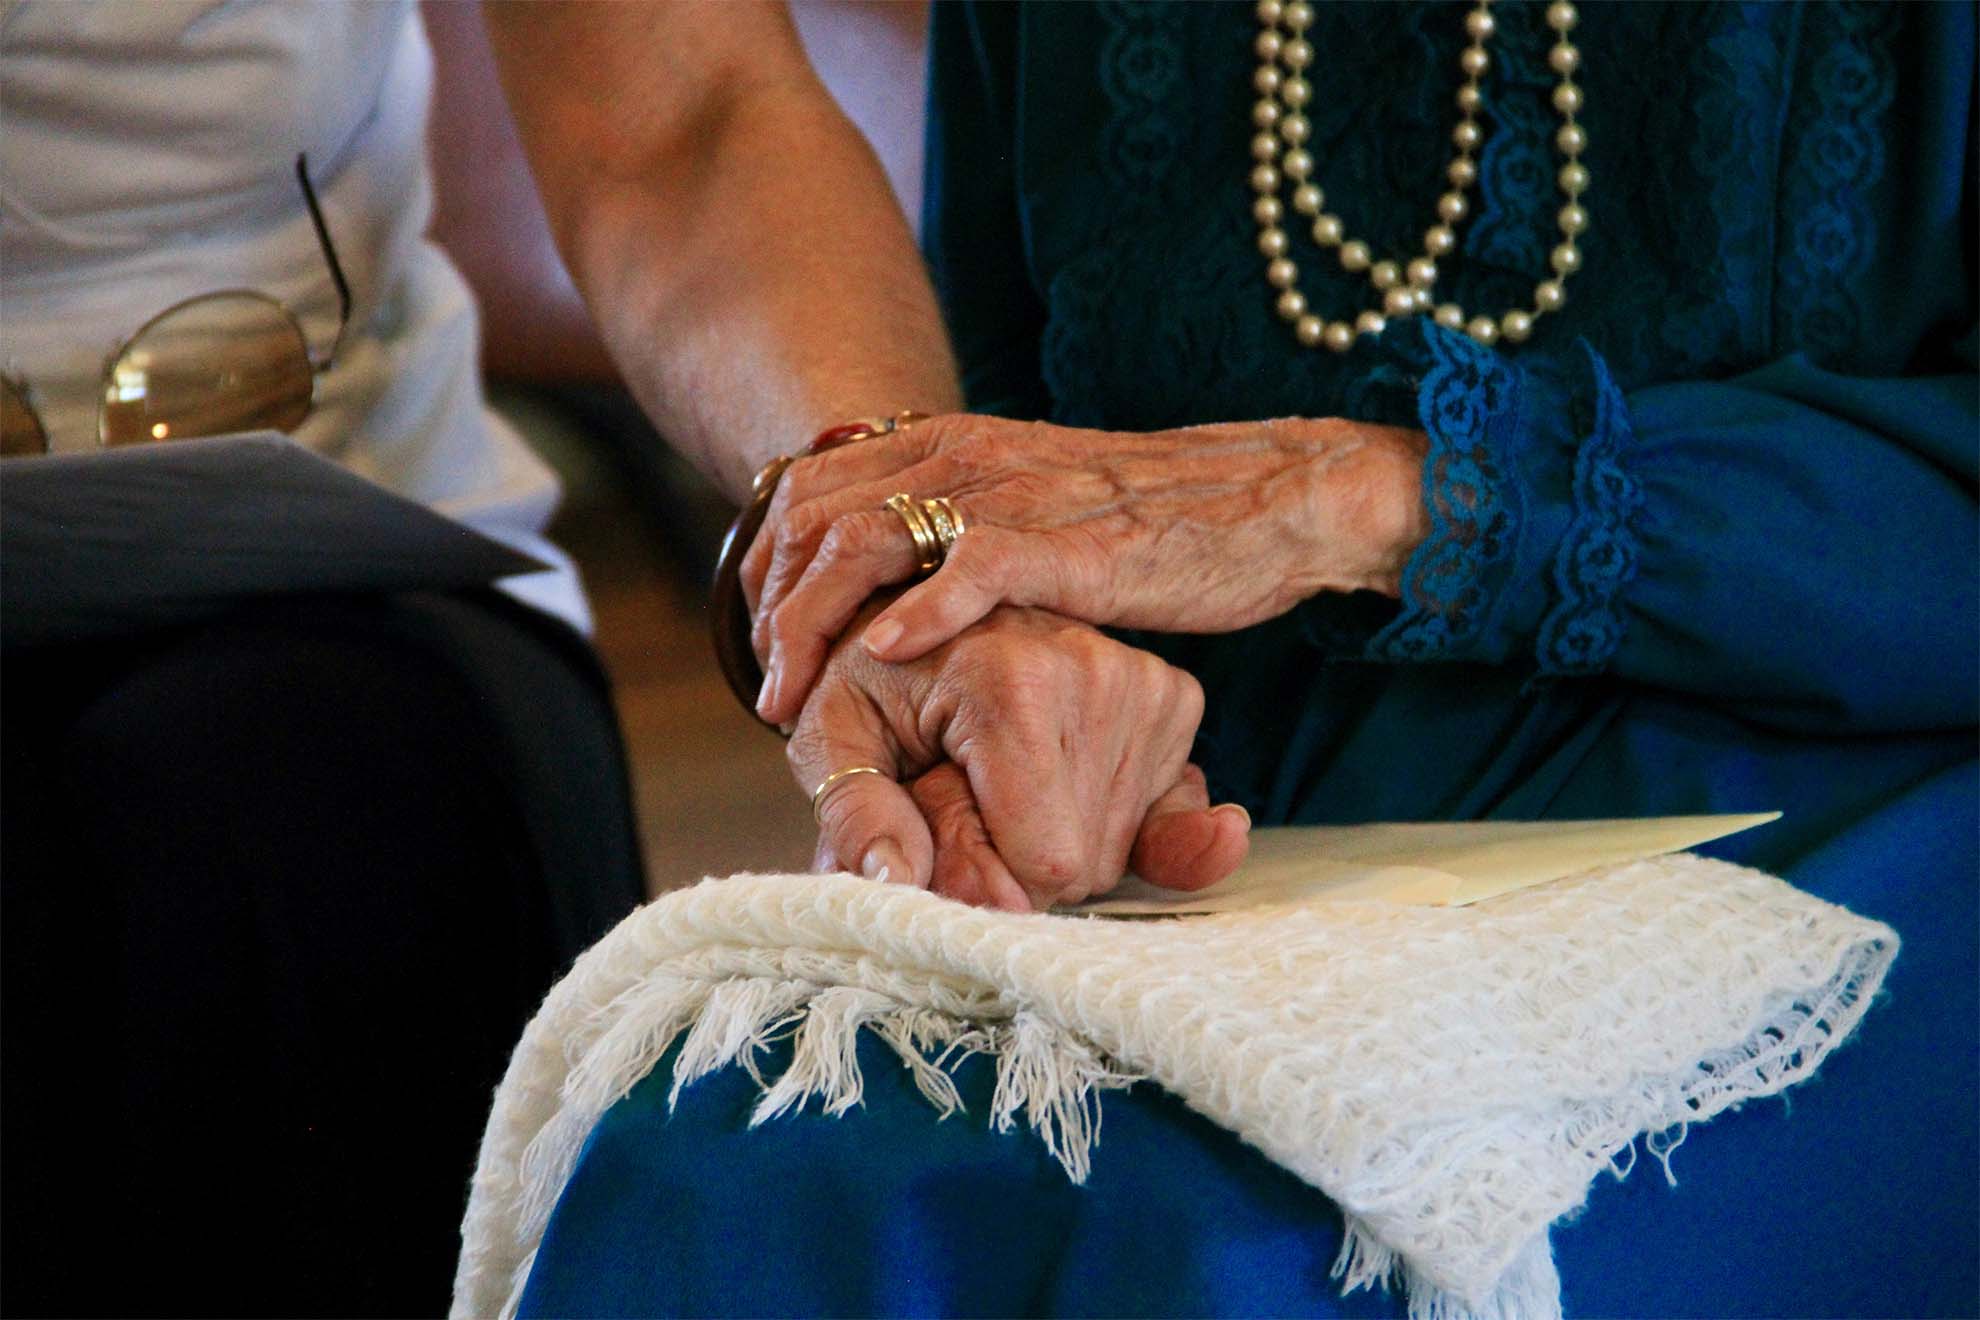 holding a residents hand